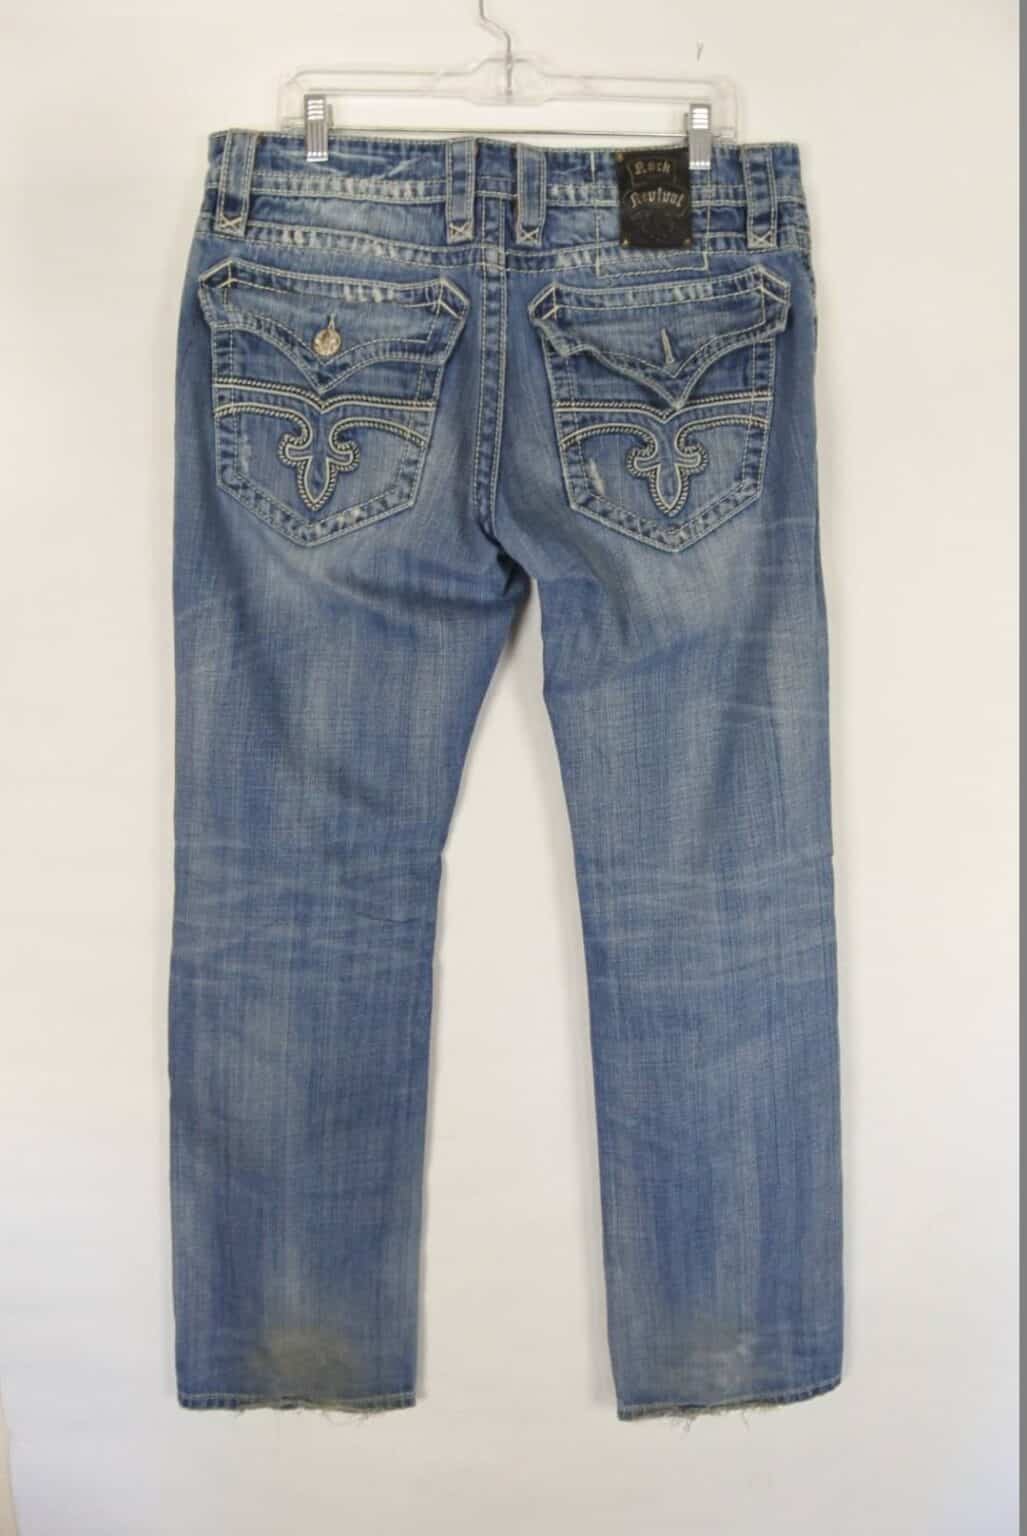 13 Best Brands Of Jeans To Resell On eBay & Poshmark